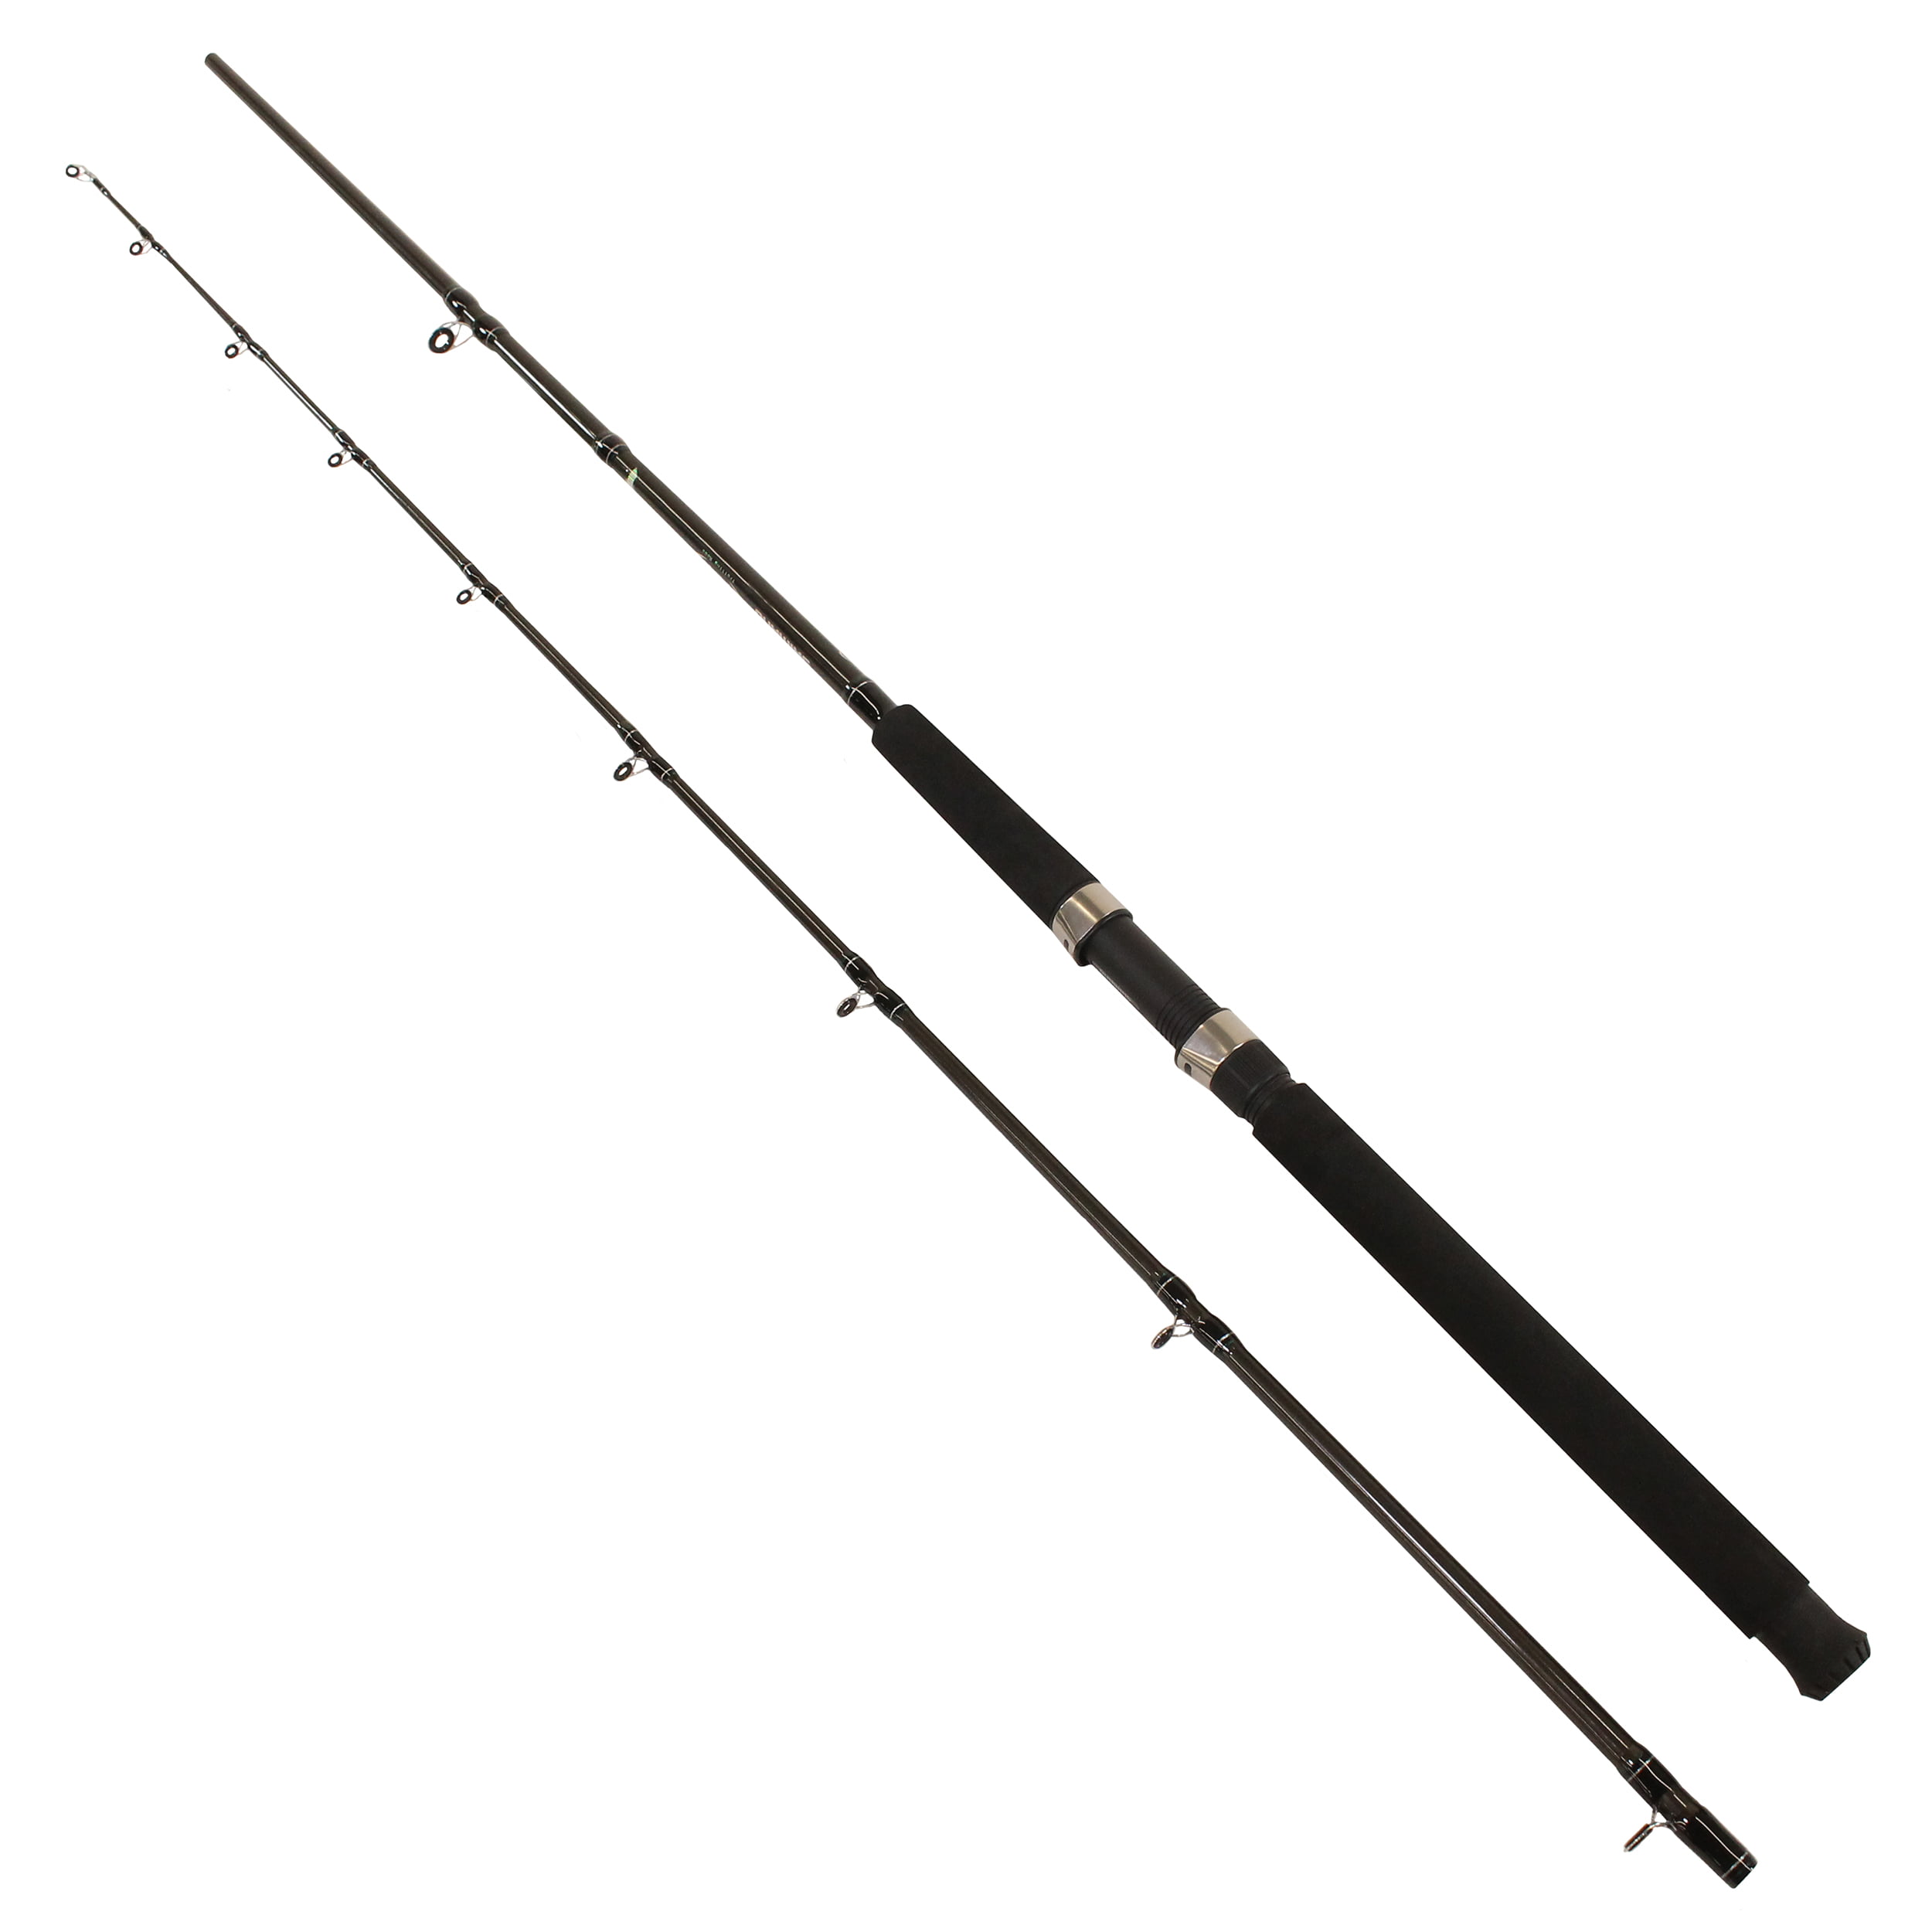 Shimano FX Spinning Rod 7' Length, 2pc Rod, 15-30 lb Line Rate, 1